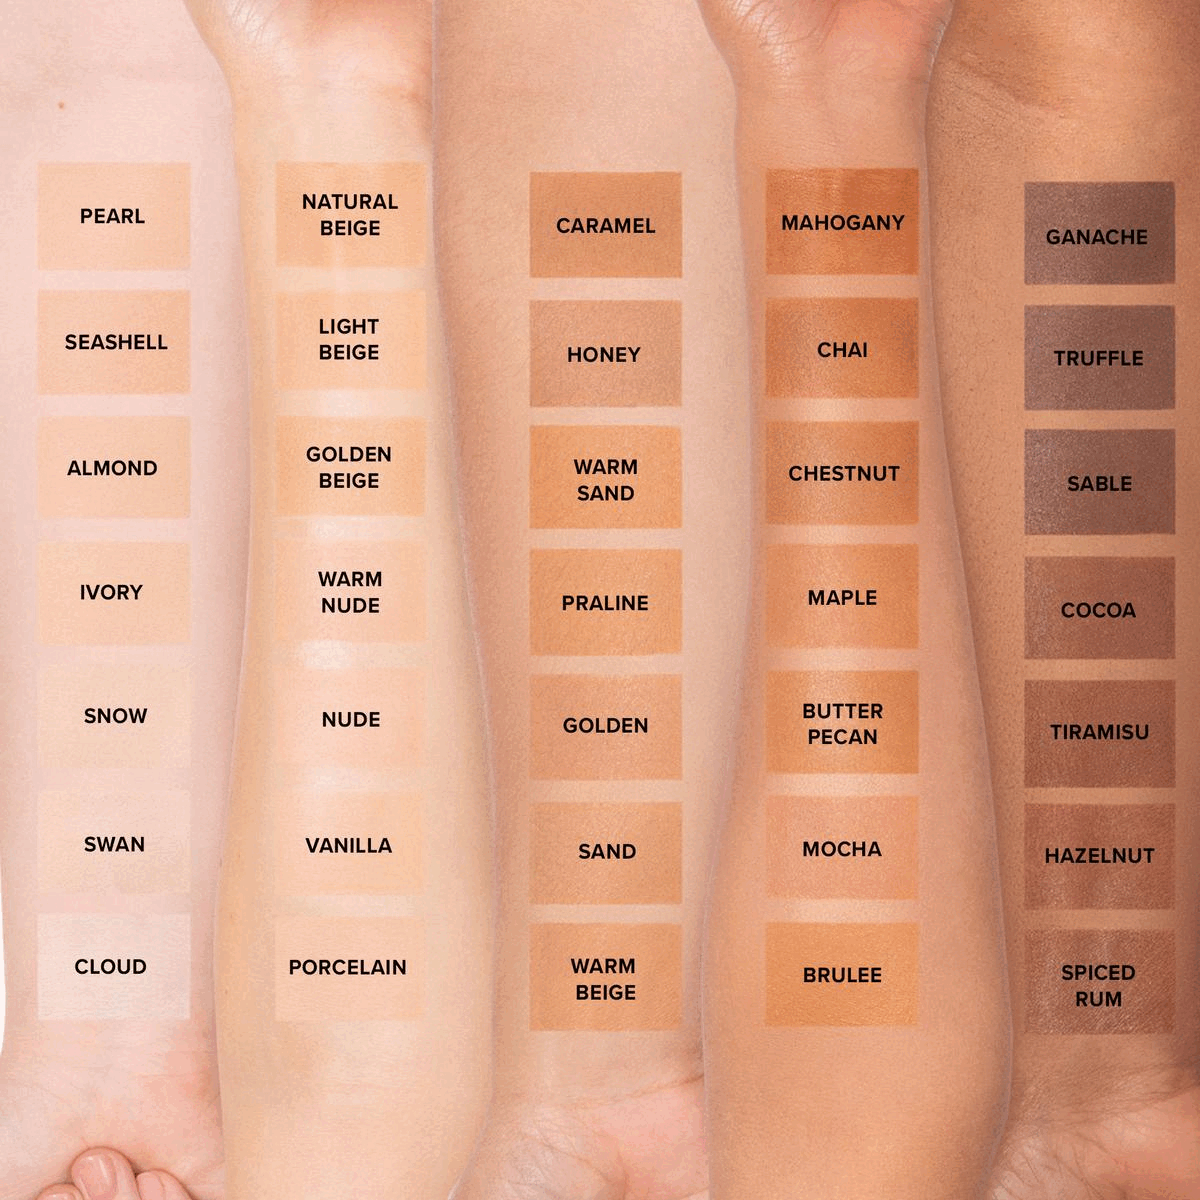 Four images transitioning into each other in an endless loop. Image 1: Showing the different foundation shades. Text - Pearl, Natural, Beige, Caramel, Mahogany, Ganache, Seashell, Light, Beige, Honey, Chai, Truffle, Almond, Golden, Beige, Warm, Sand, Chestnut, Sable, Ivory, Warm, Nude, Praline, Maple, Cocoa, Snow, Nude, Golden, Butter, Pecan, Tiramisu, Swan, Vanilla, Sand, Mocha, Hazelnut, Cloud, Porcelain, Warm, Beige, Brulee, Spiced, Rum. Image 2: Shows three examples of the foundation in different shades of light, medium and dark. Text - VEGAN, crueltyfree, Infused with coconut water, hyaluronic acid & alpine rose, Oil-free formula, 12-hour longwear, 35 versatile shades. Image 3: A table of key information on products. Text - BORN THIS WAY MATTE: 24 HOUR UNDETECTABLE SUPER LONGWEAR FOUNDATION. This lightweight, oil-controlling, matte foundation stays true to color keeping you looking smooth and flawless for 24 hours. Natural Matte. Medium - Full. 24 Hours. NUMBER OF SHADES 35. KEY INGREDIENTS Coconut Water, Hyaluronic Acid, Alpine Rose. BORN THIS WAY: This oil-free, hydrating foundation masterfully diffuses the line between makeup and skin in 35 shades. Oil-free Photo-friendly Non-comedogenic, Longwearing, Hydrating, Oil-free, Non-comedogenic. Natural. 12 Hours. NUMBER OF SHADES 35. KEY INGREDIENTS Coconut Water, Hyaluronic Acid, Alpine Rose. BORN THIS WAY Super Coverage Multi-Use Sculpting Concealer: A skin perfecting concealer/makeup hybrid that conceals, contours, highlights, and retouches. Longwearing Hydrating, Oil-free, Non-comedogenic, Photo-friendly. Natural. COVERAGE Full. 12 Hours. NUMBER OF SHADES 35. KEY INGREDIENTS Coconut Water, Hyaluronic Acid, Alpine Rose. Image 4: Find your shade chart